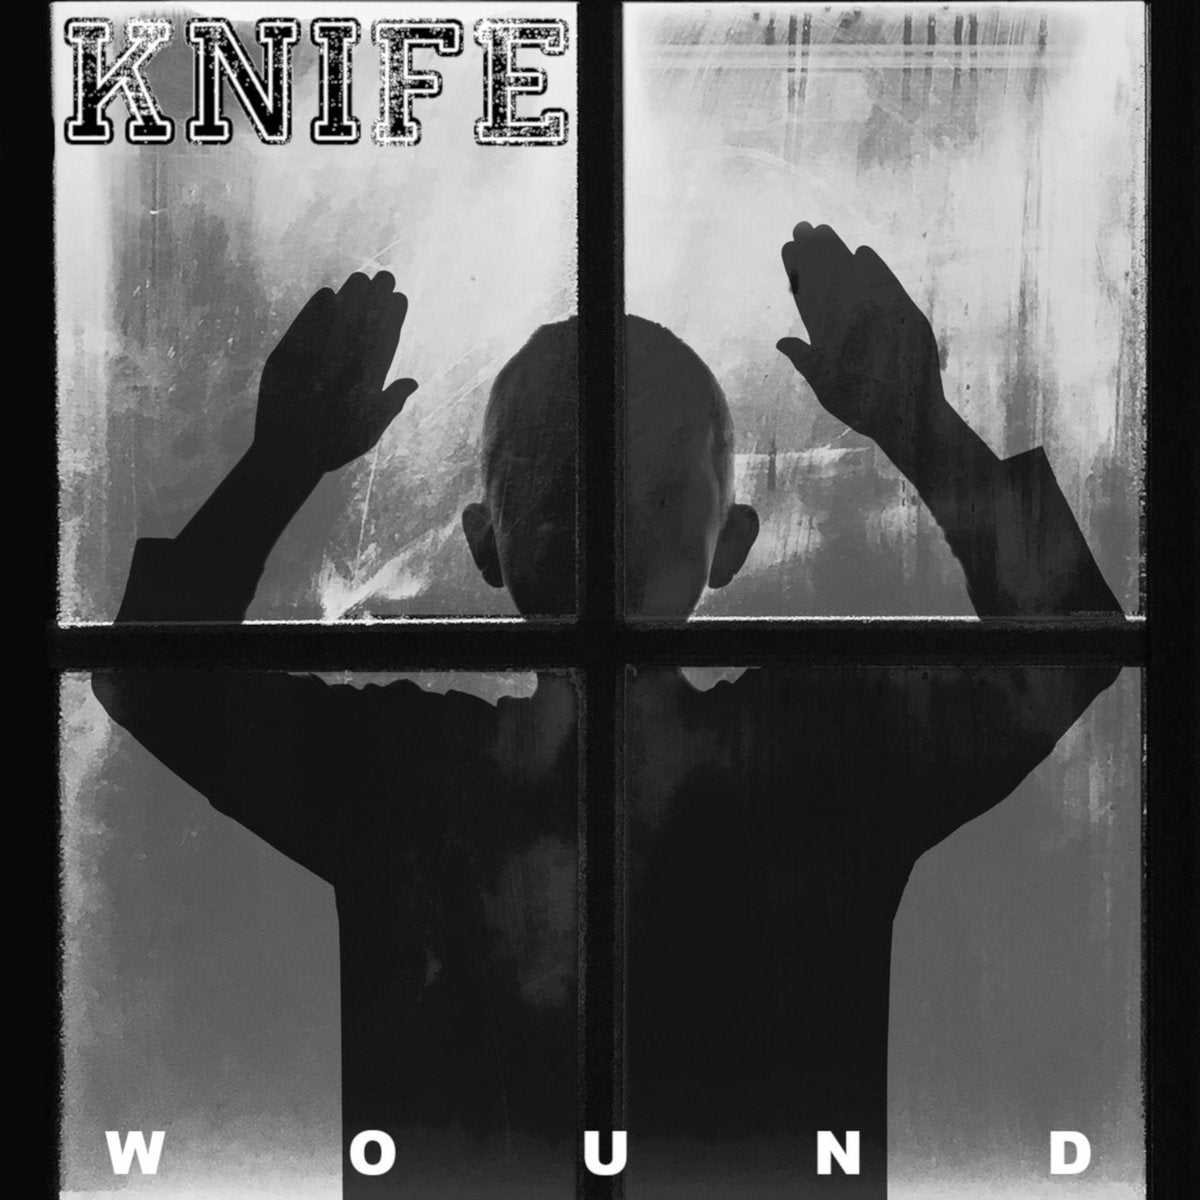 Knife "Wound" CD